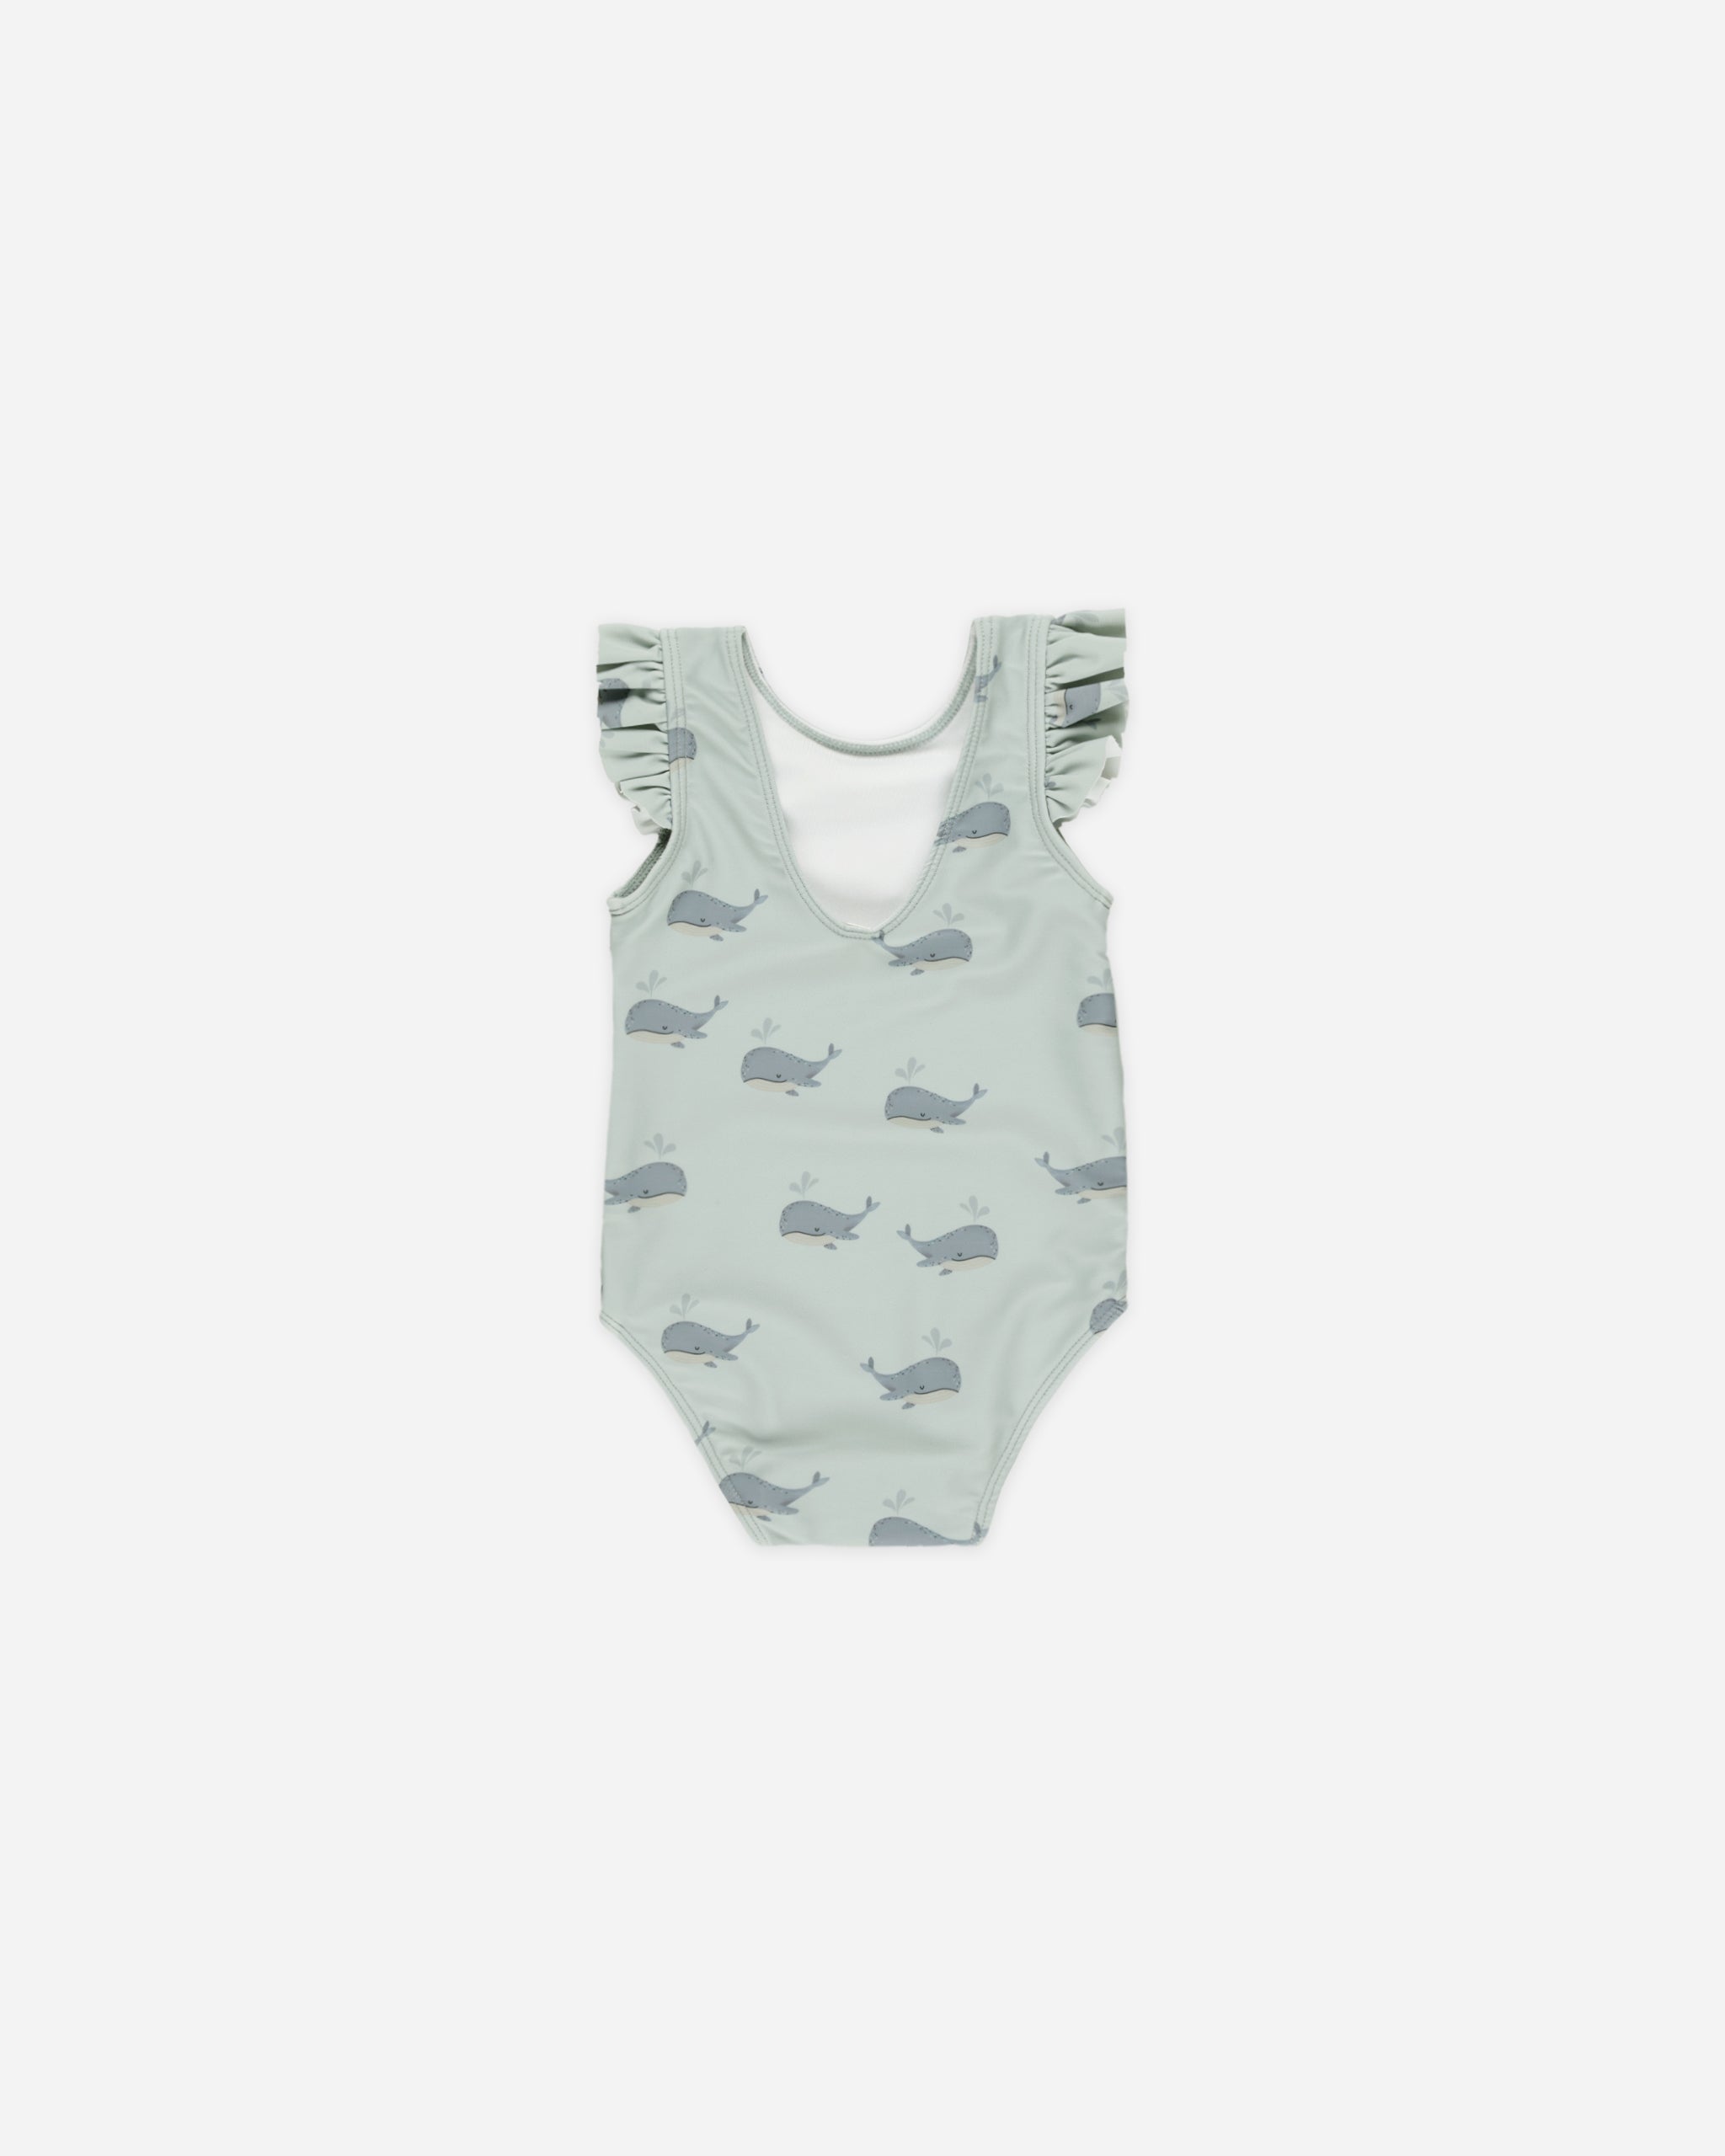 Scoop Back Onepiece || Whales - Rylee + Cru | Kids Clothes | Trendy Baby Clothes | Modern Infant Outfits |